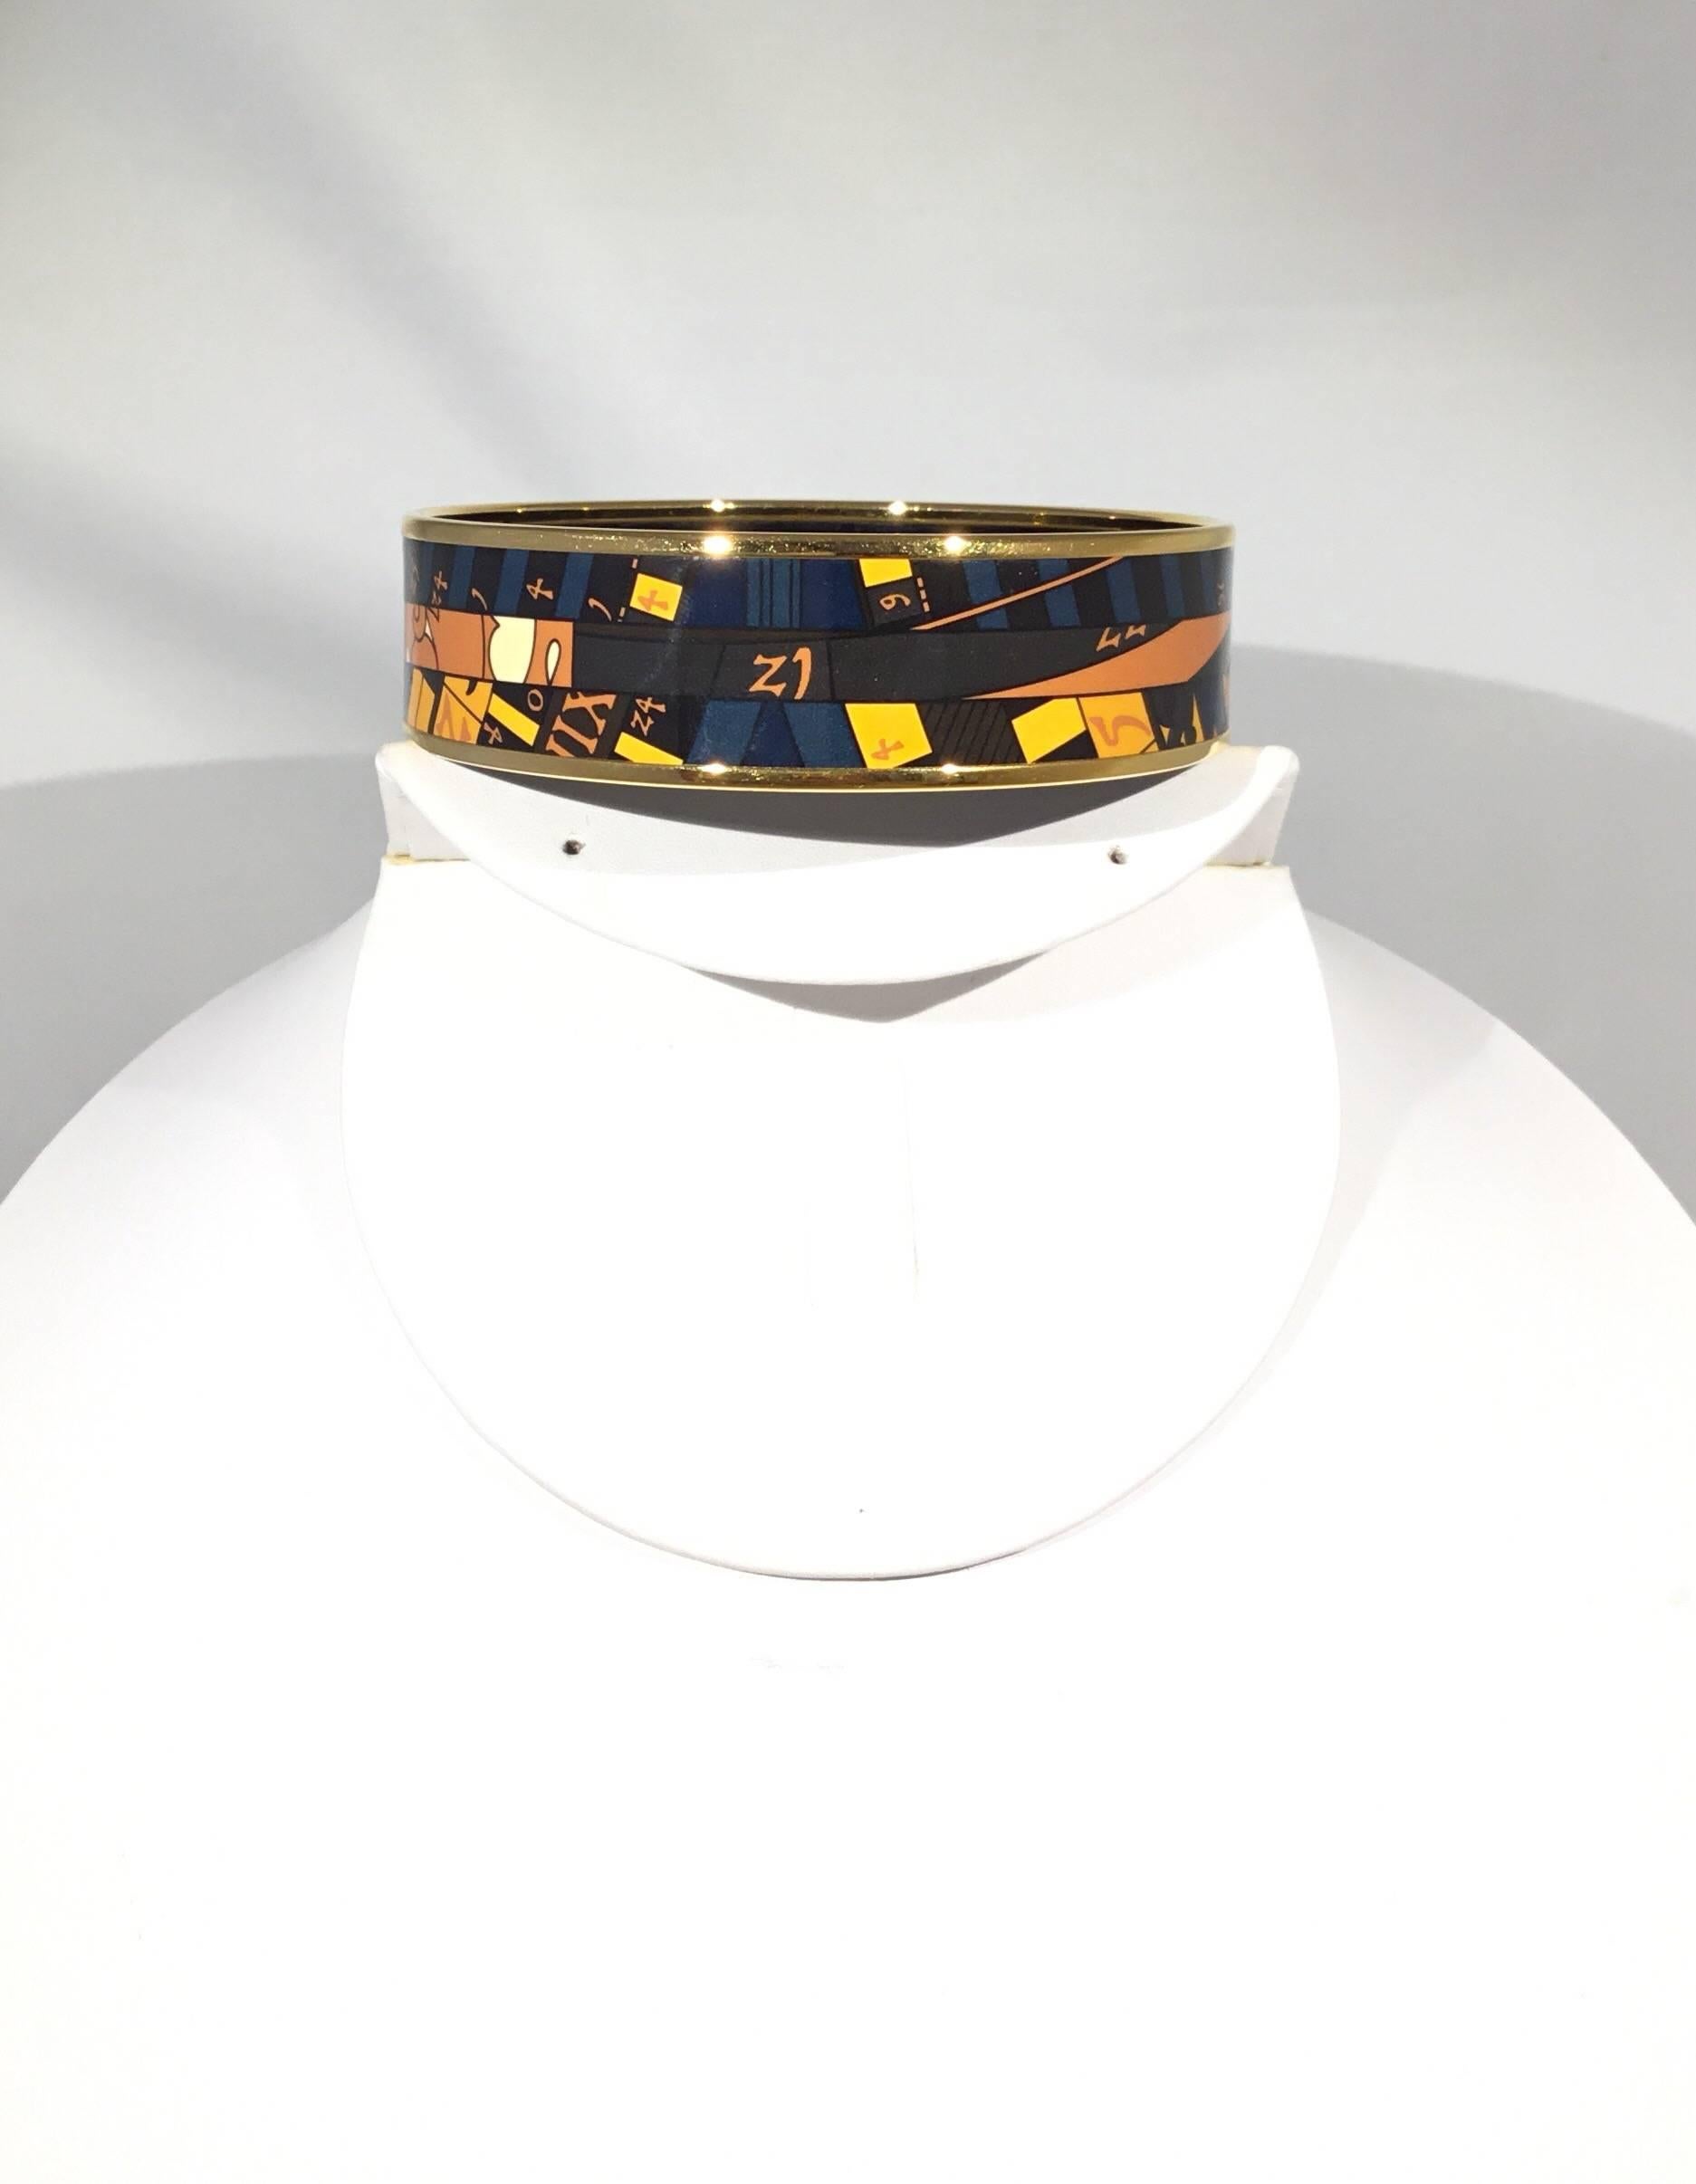 Hermes bangle featured in a Multicolor Enamel Print with gold hardware. Made in France + Q. Diameter 2.75”, width 0.75”.  Bangle includes box and dust bag. 